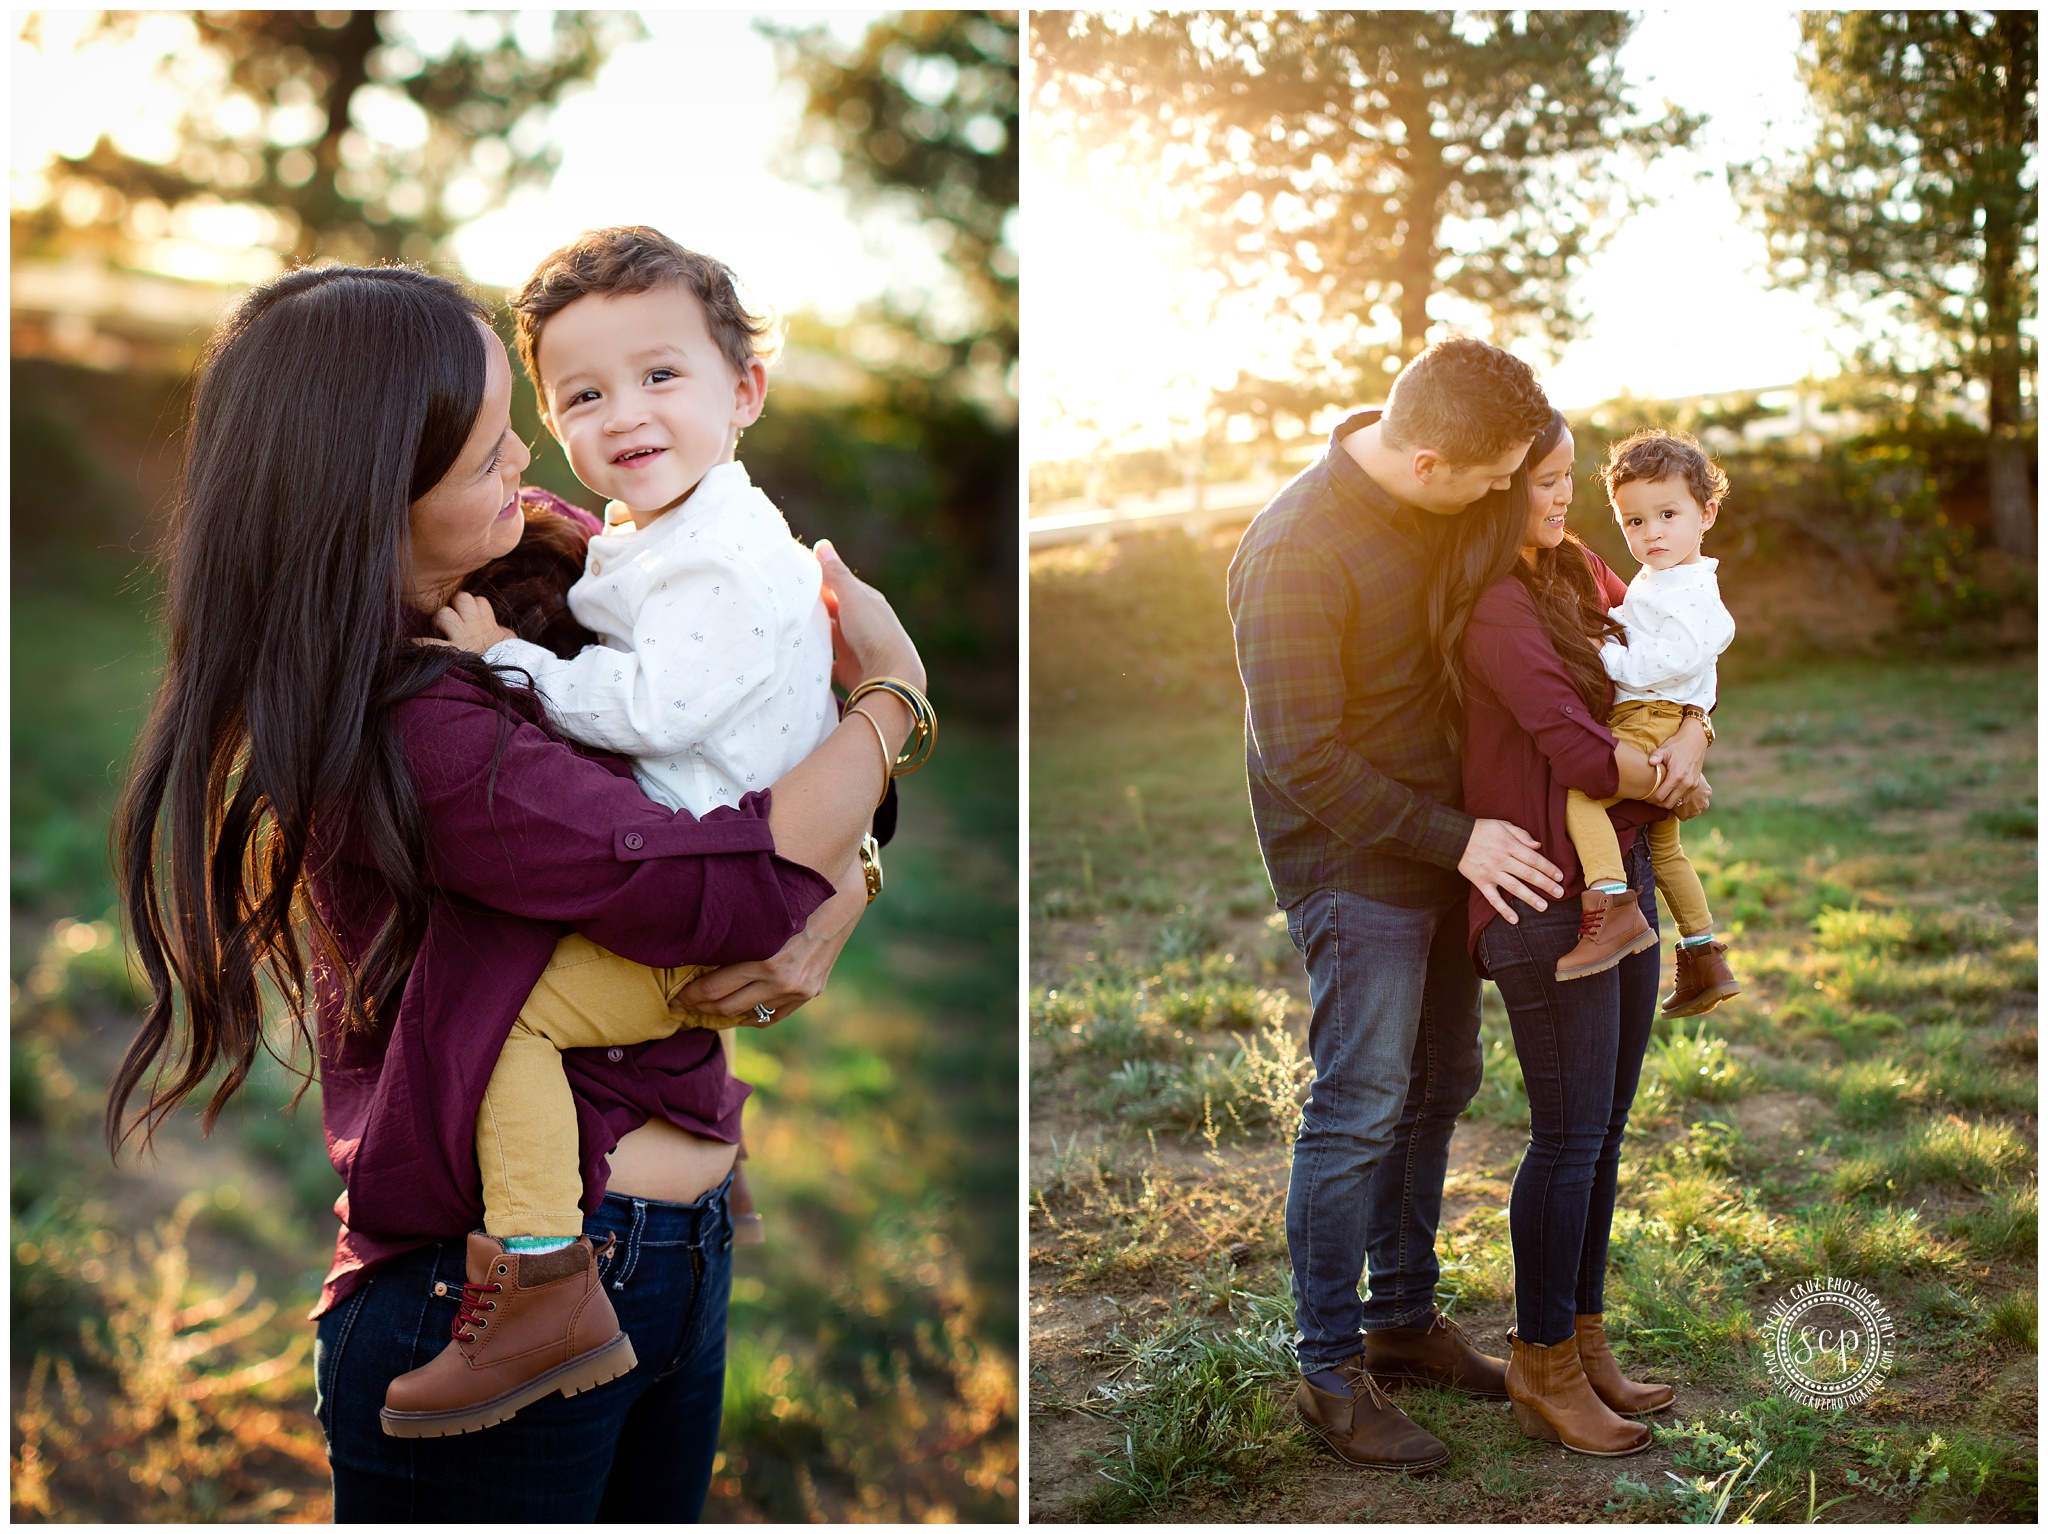 What a great photo of toddler with mom and parents during their fall pictures at Anaheim Hills.